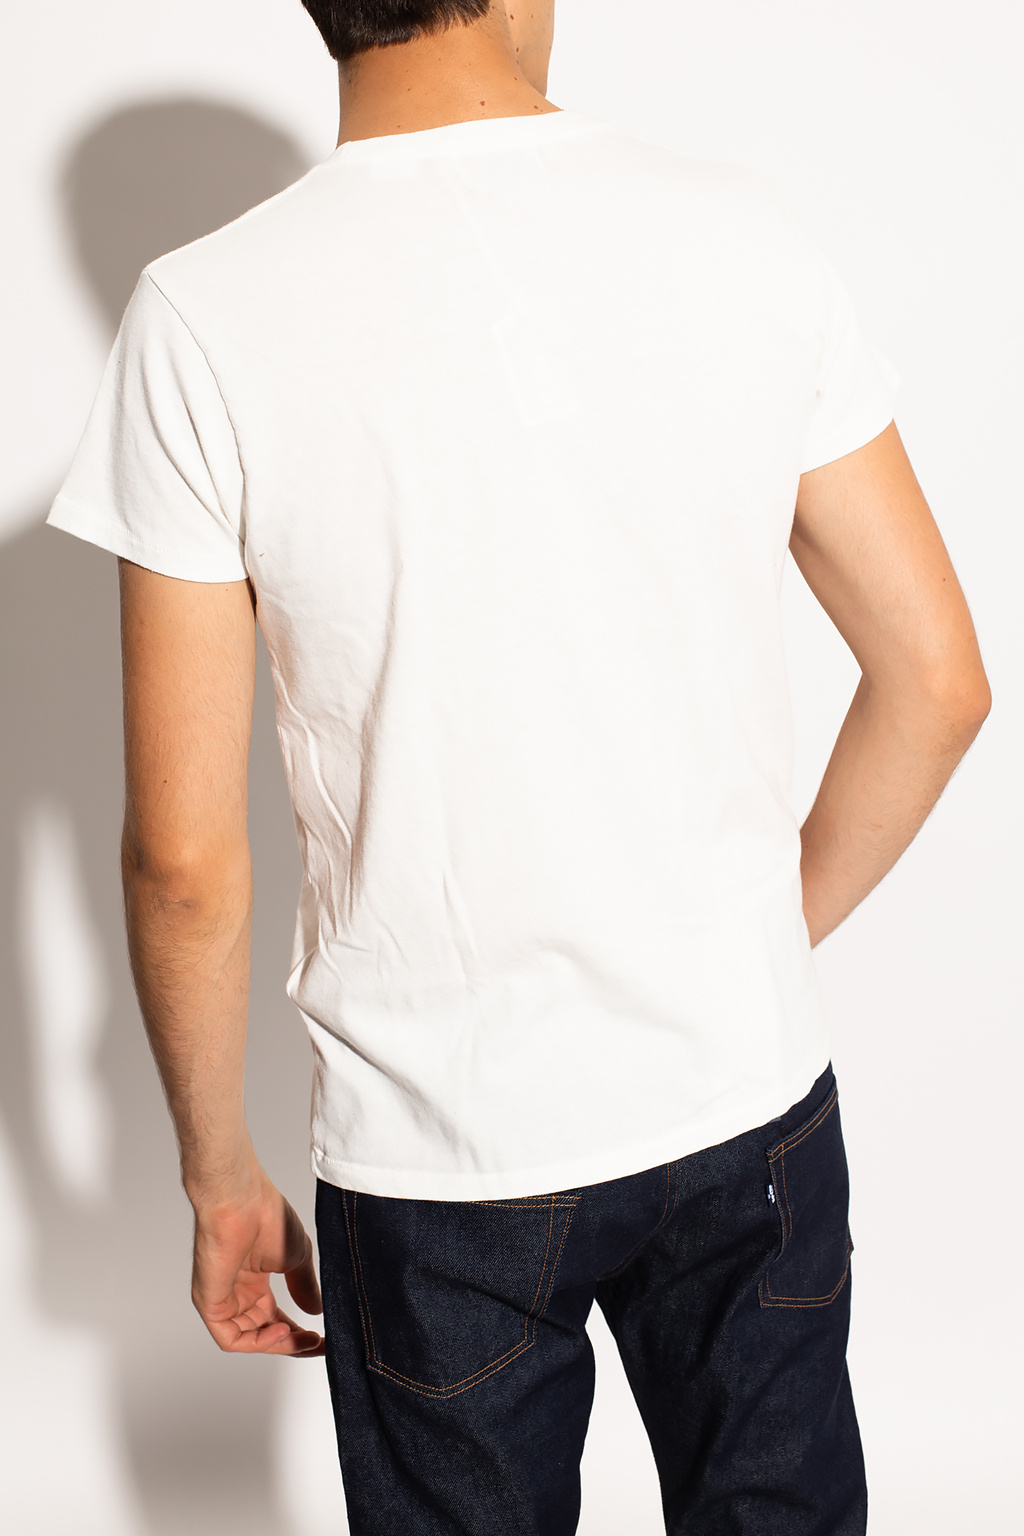 Levis T-shirt ‘Vintage Clothing’ collection